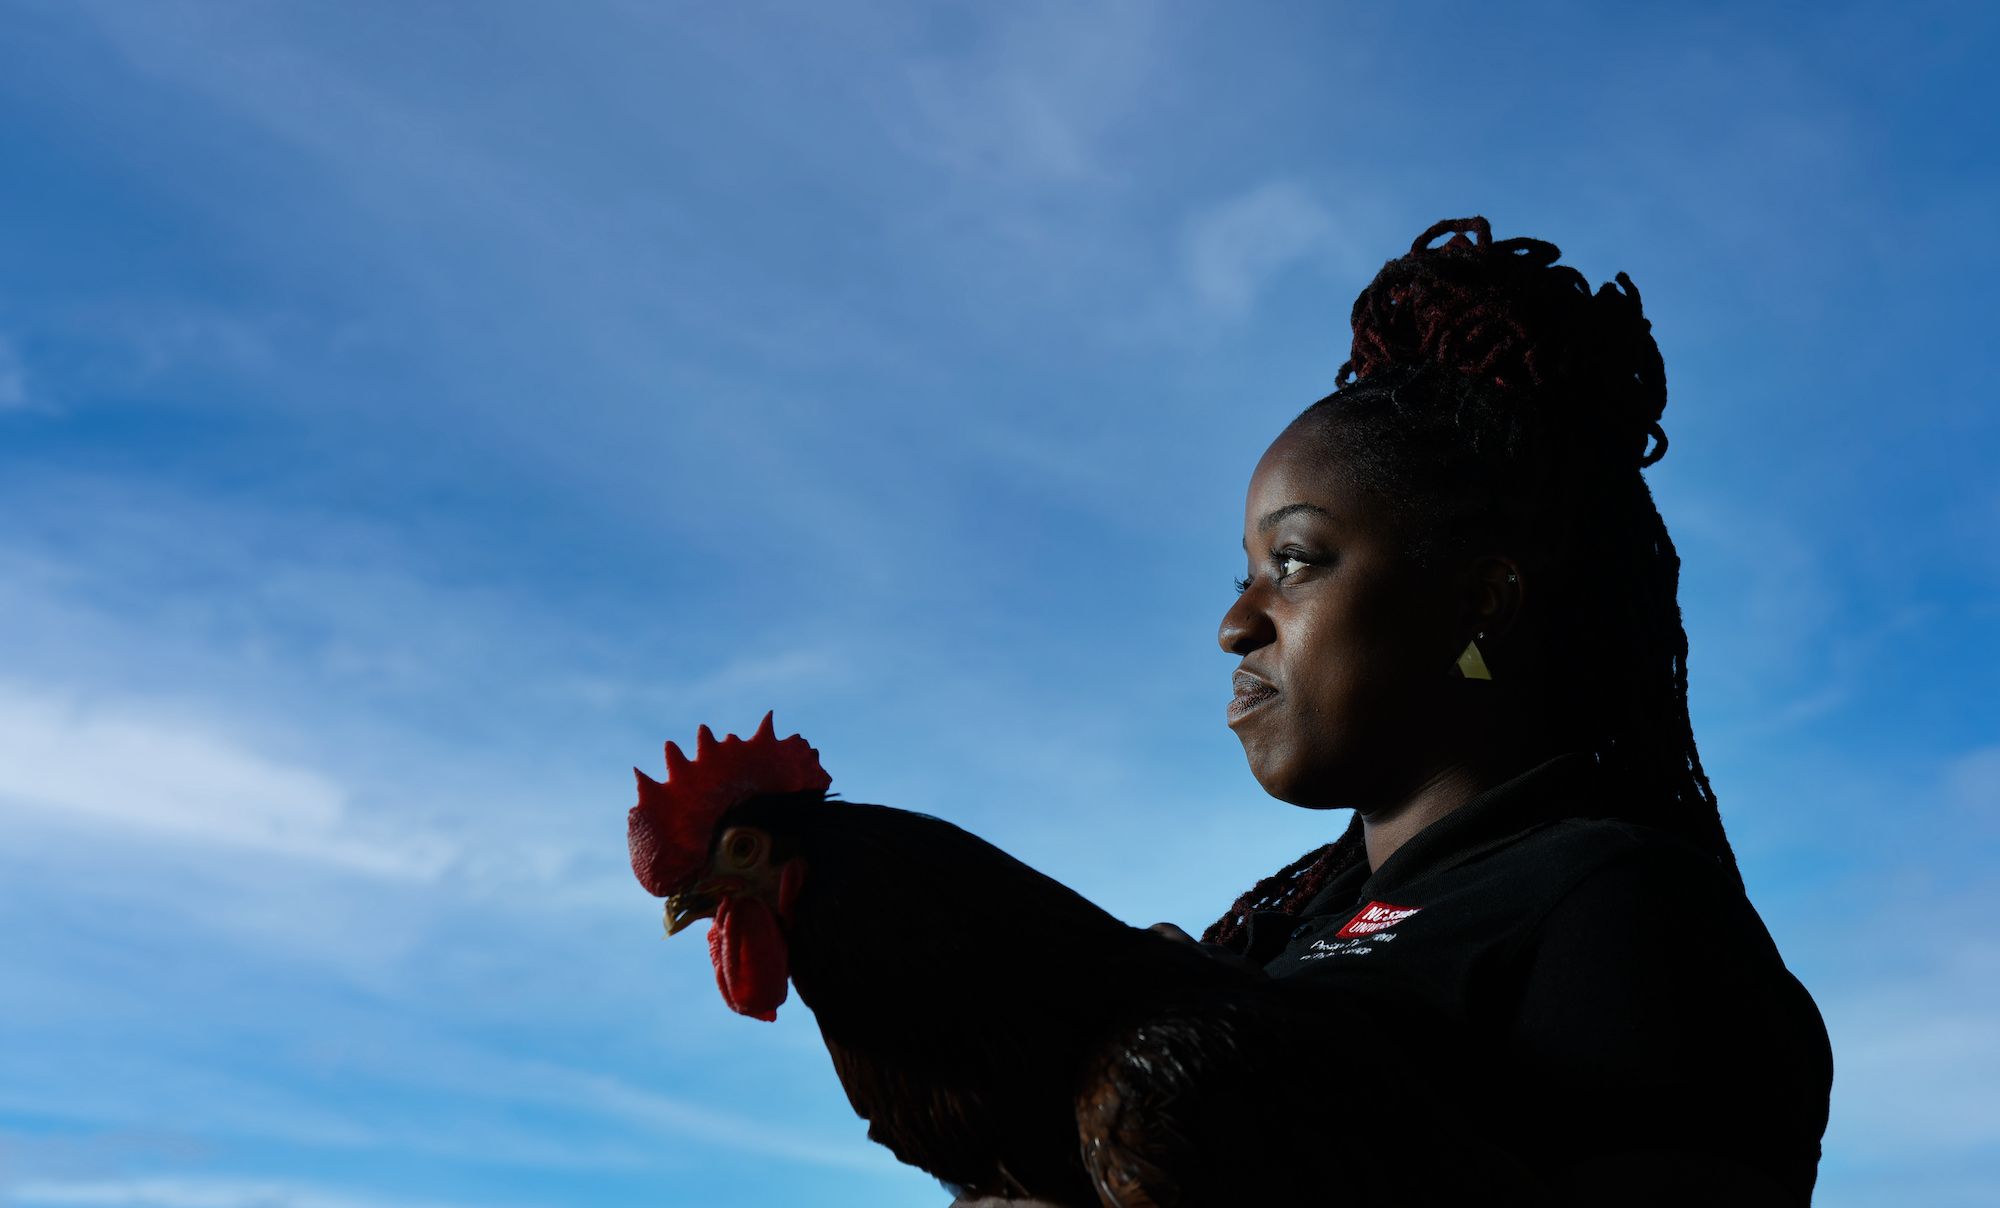 Poultry Science PHD Graduate, Dannica Walls, with her a gaze on a flower in her hands